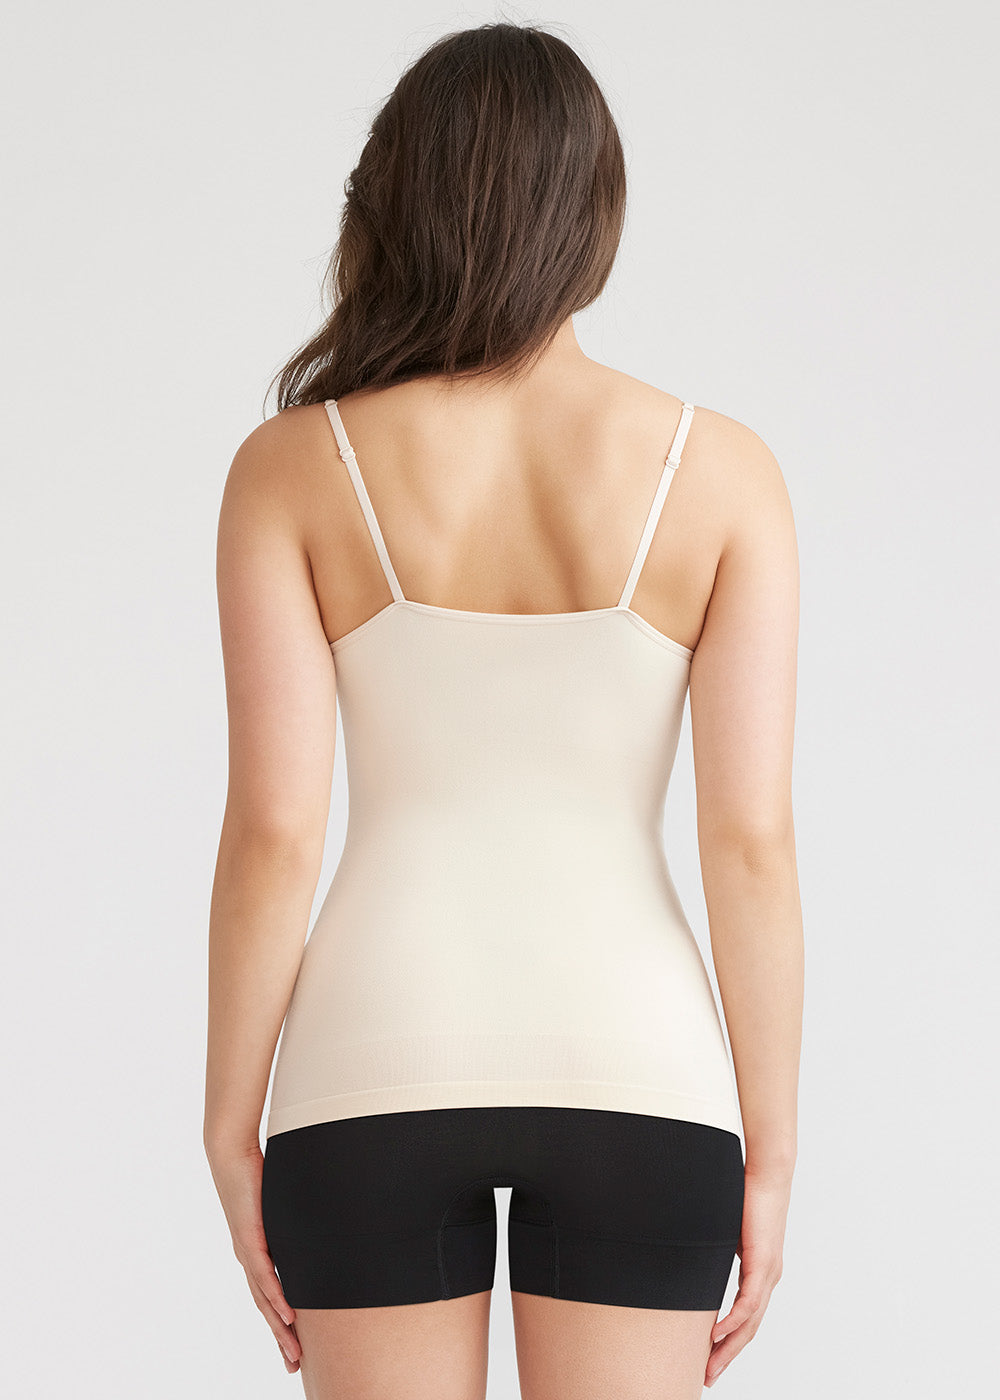 April Seamless Shaping Camisole - Black